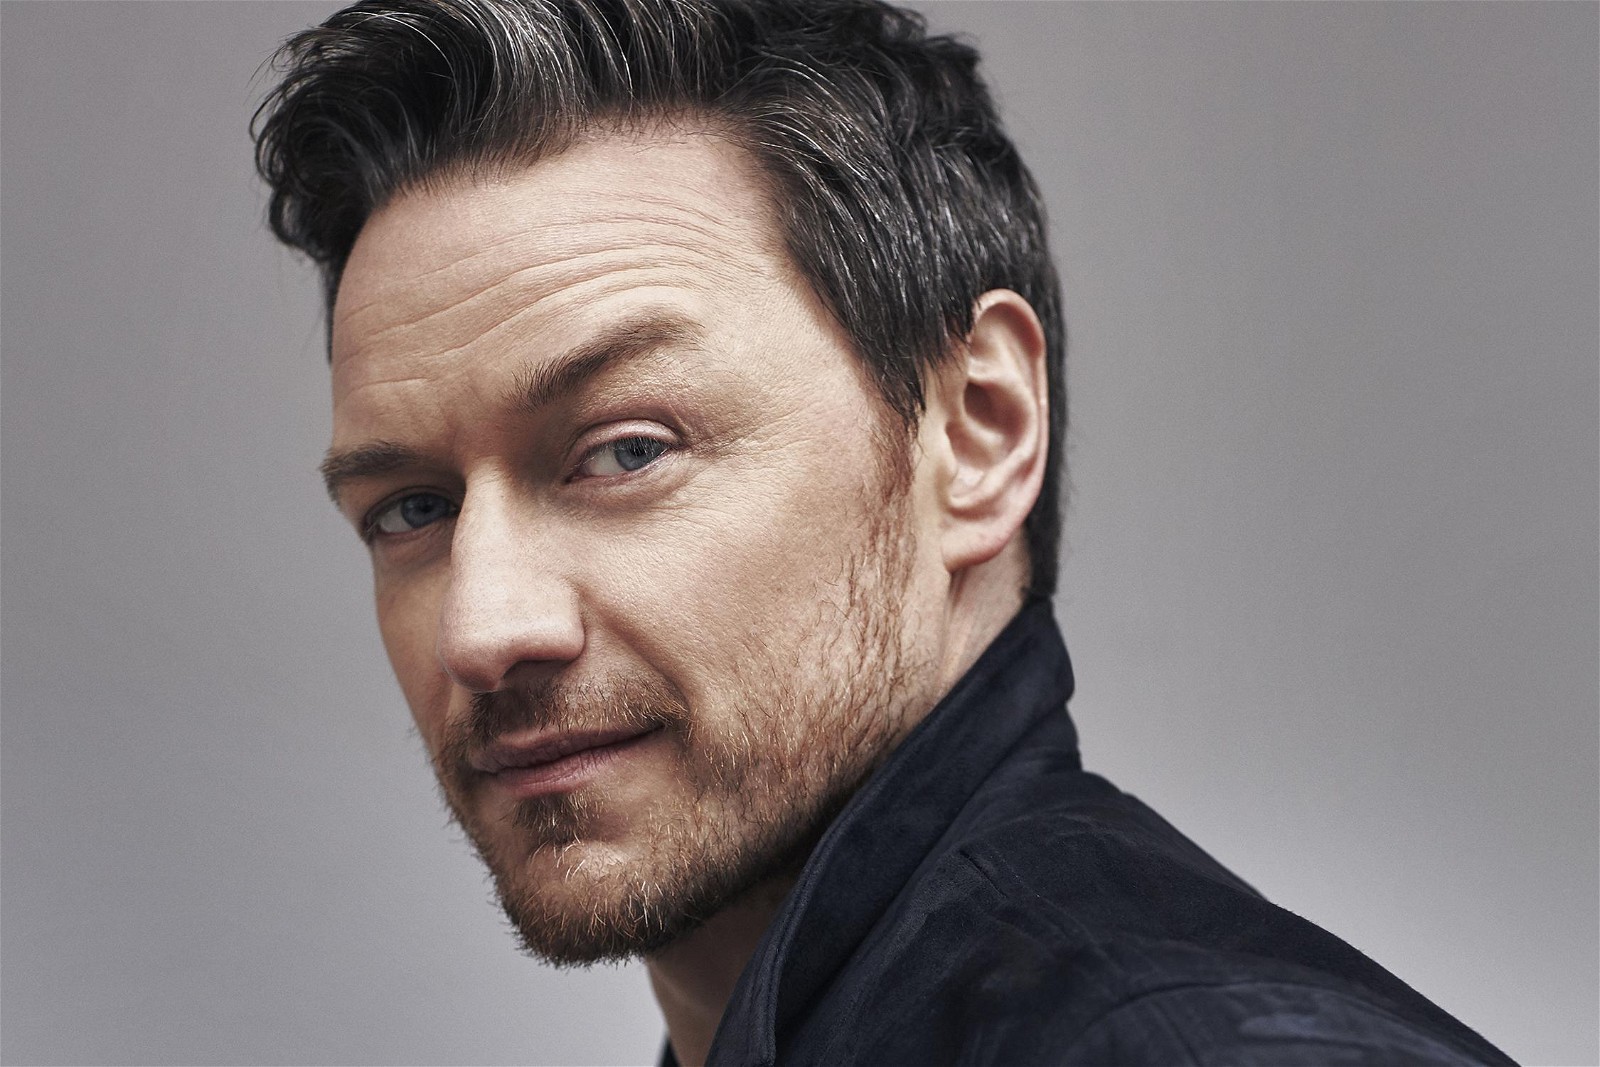 James McAvoy lists his most difficult movie